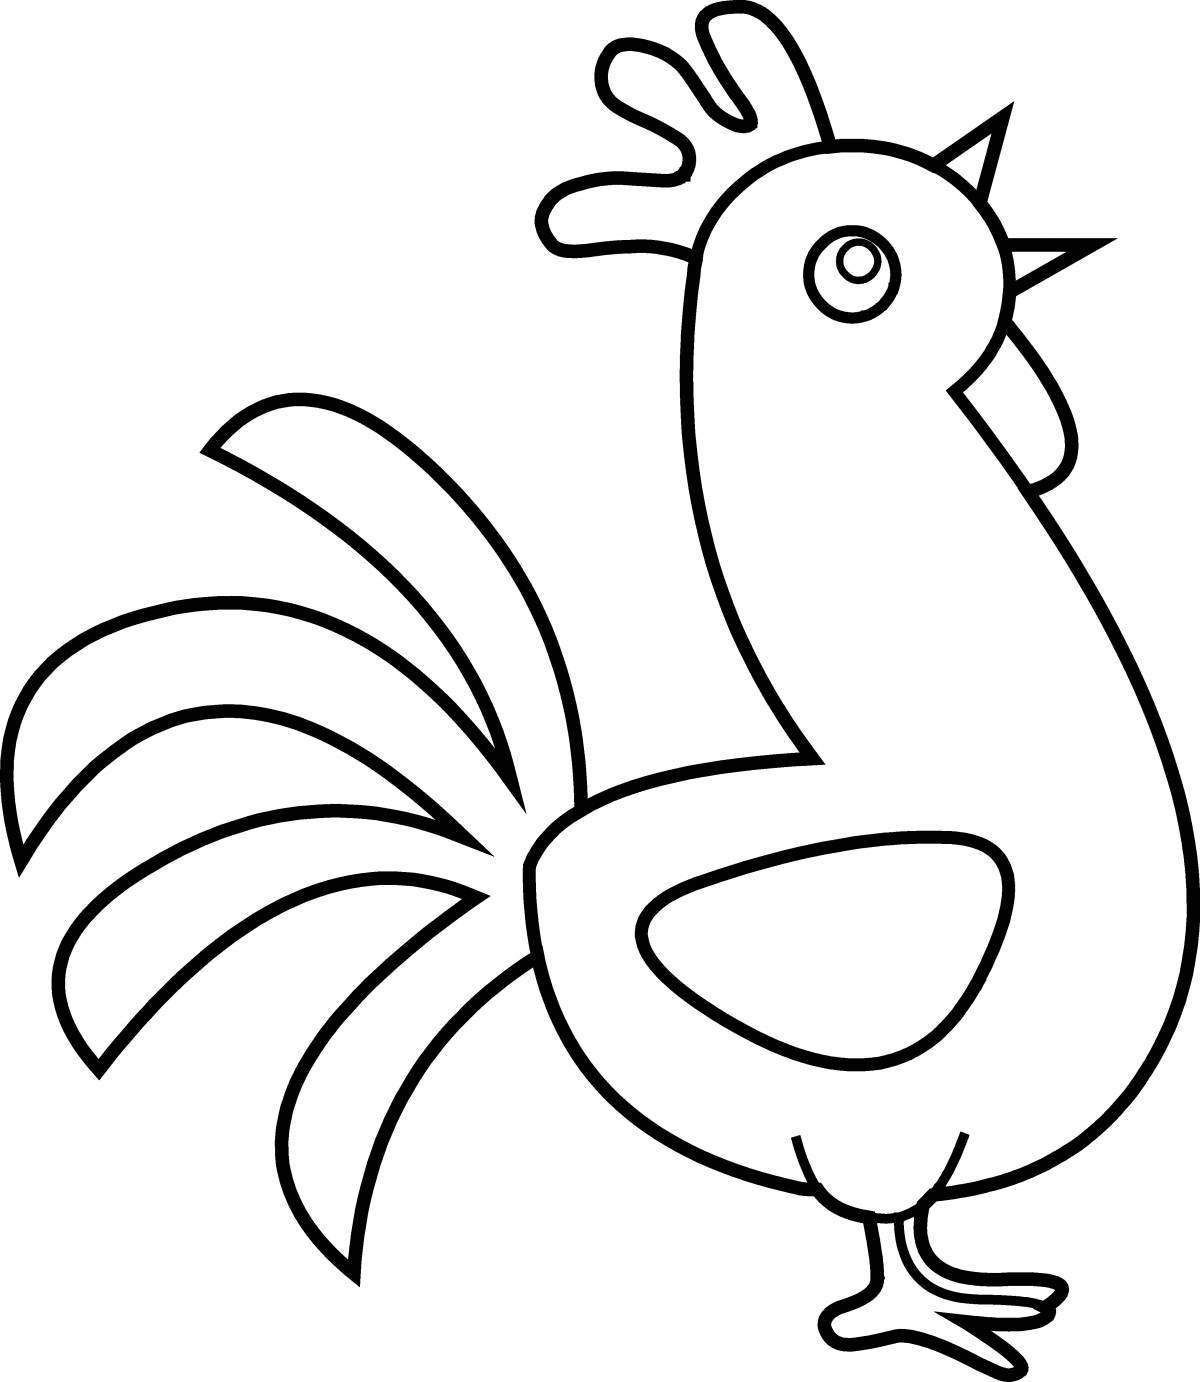 Colourful rooster coloring page